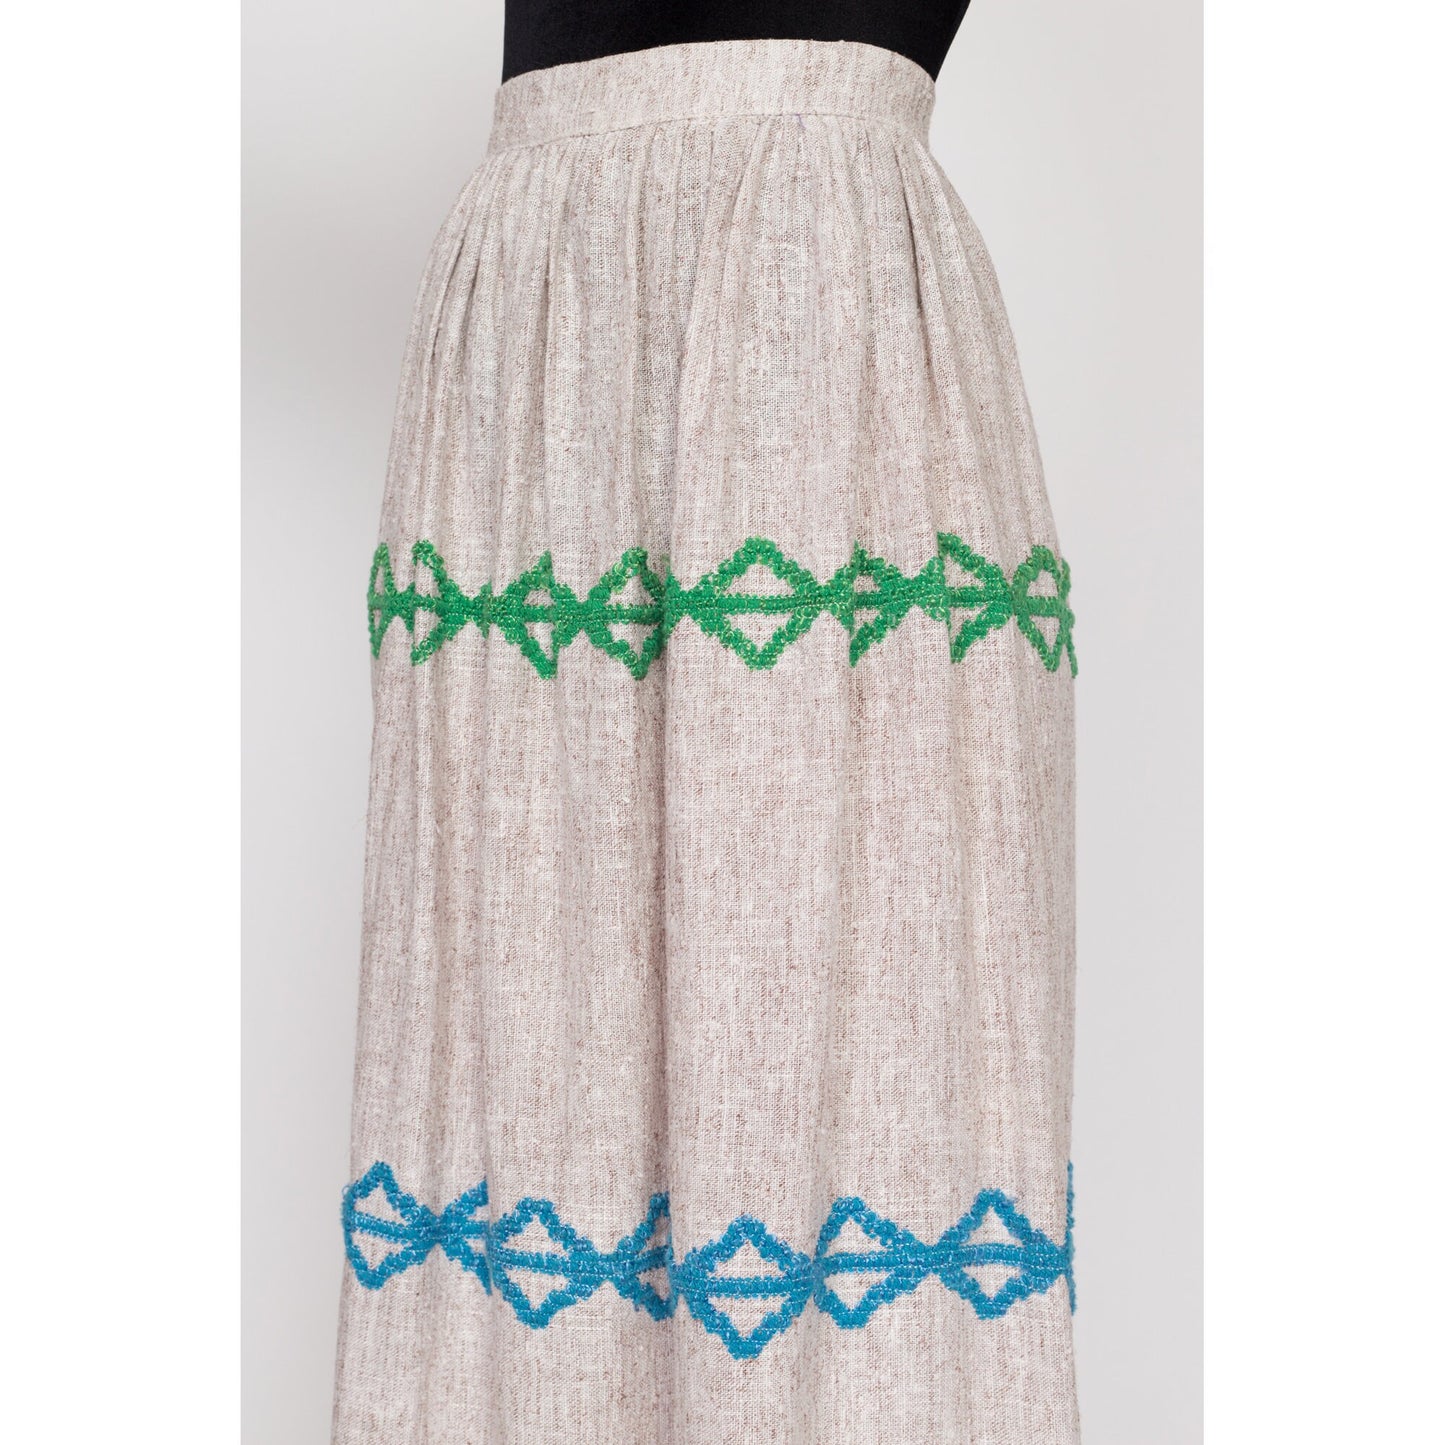 XS 70s Boho Embroidered Woven Maxi Skirt 24.5" | Vintage Striped A Line Long Hippie Hostess Skirt